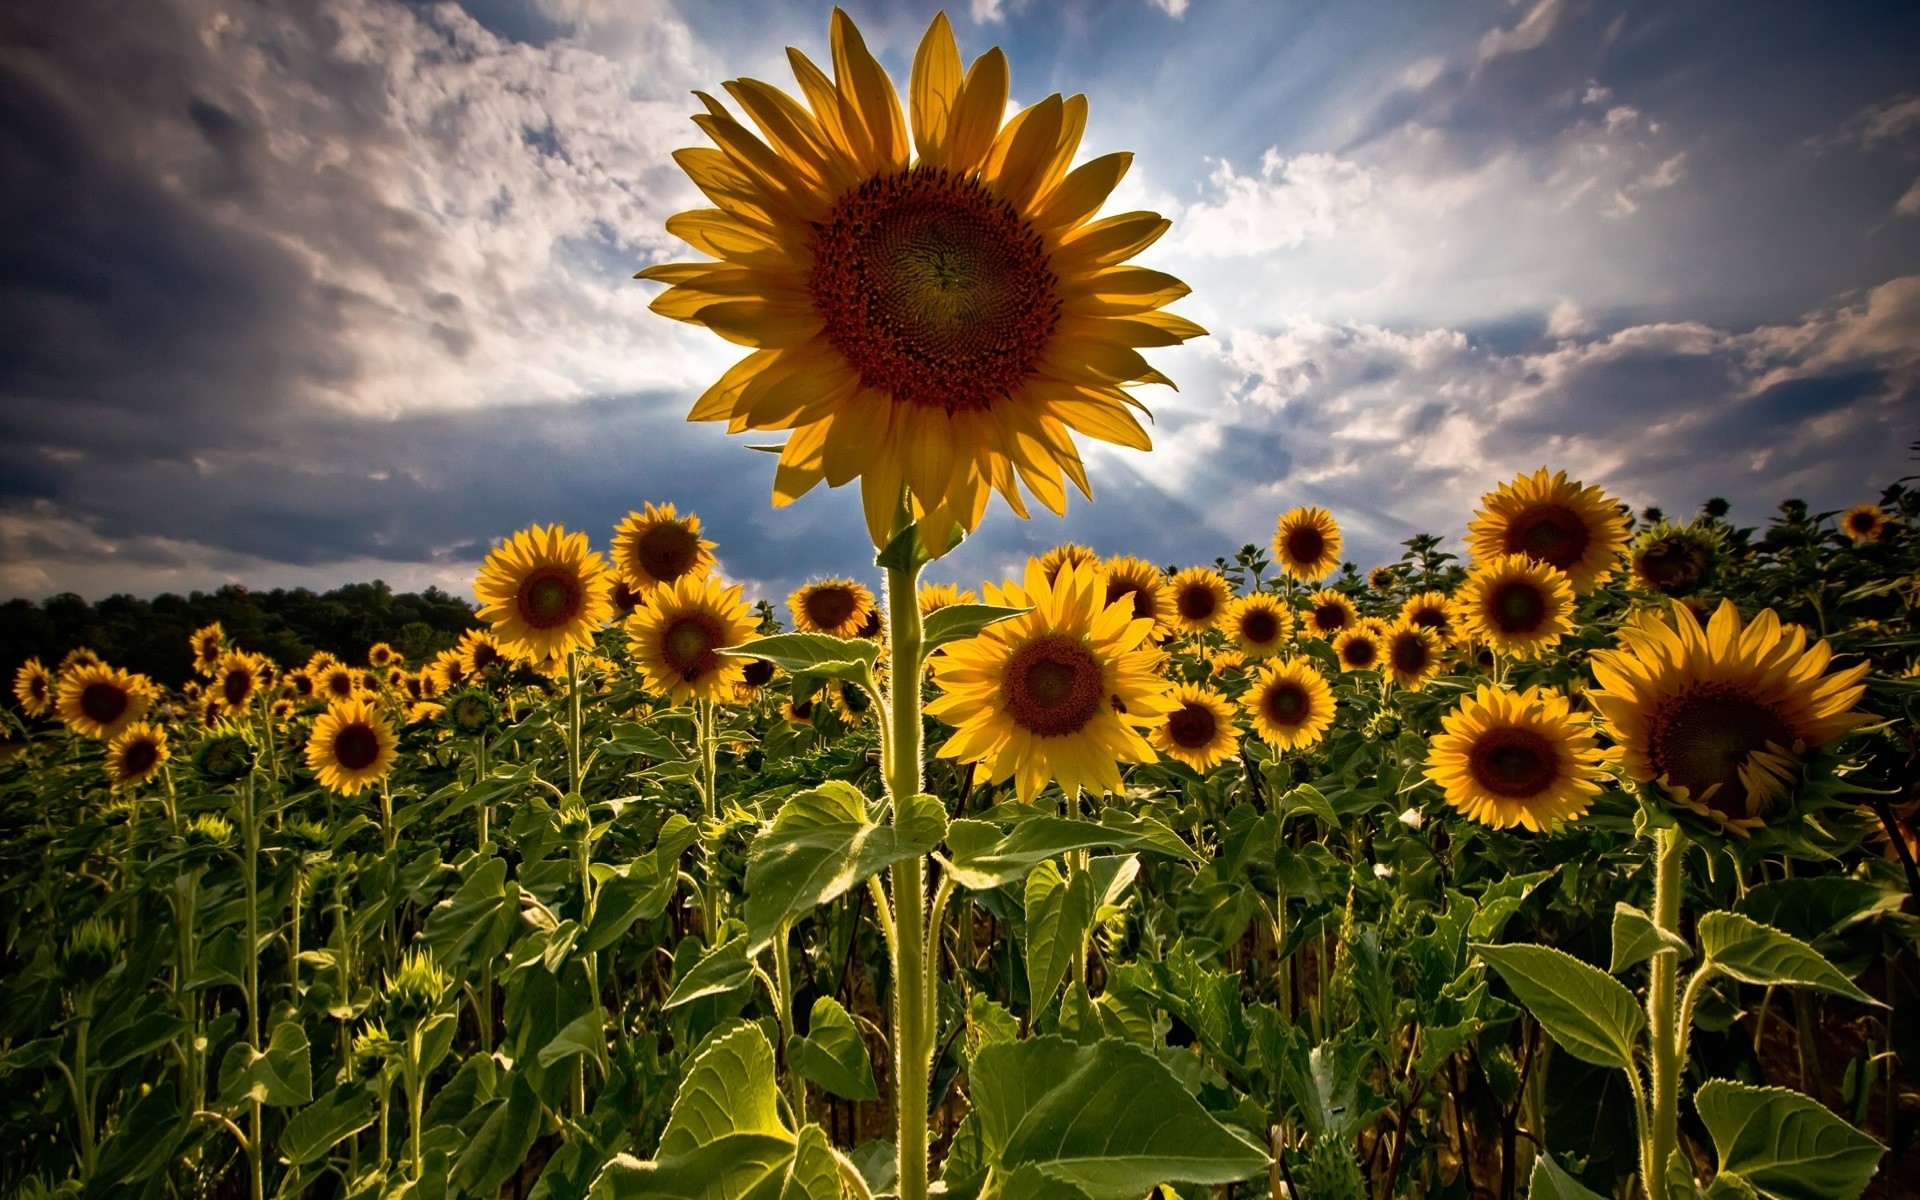 flowers nature sunflower flora summer field flower sun rural growth leaf bright fair weather sunny agriculture season color floral hayfield seed